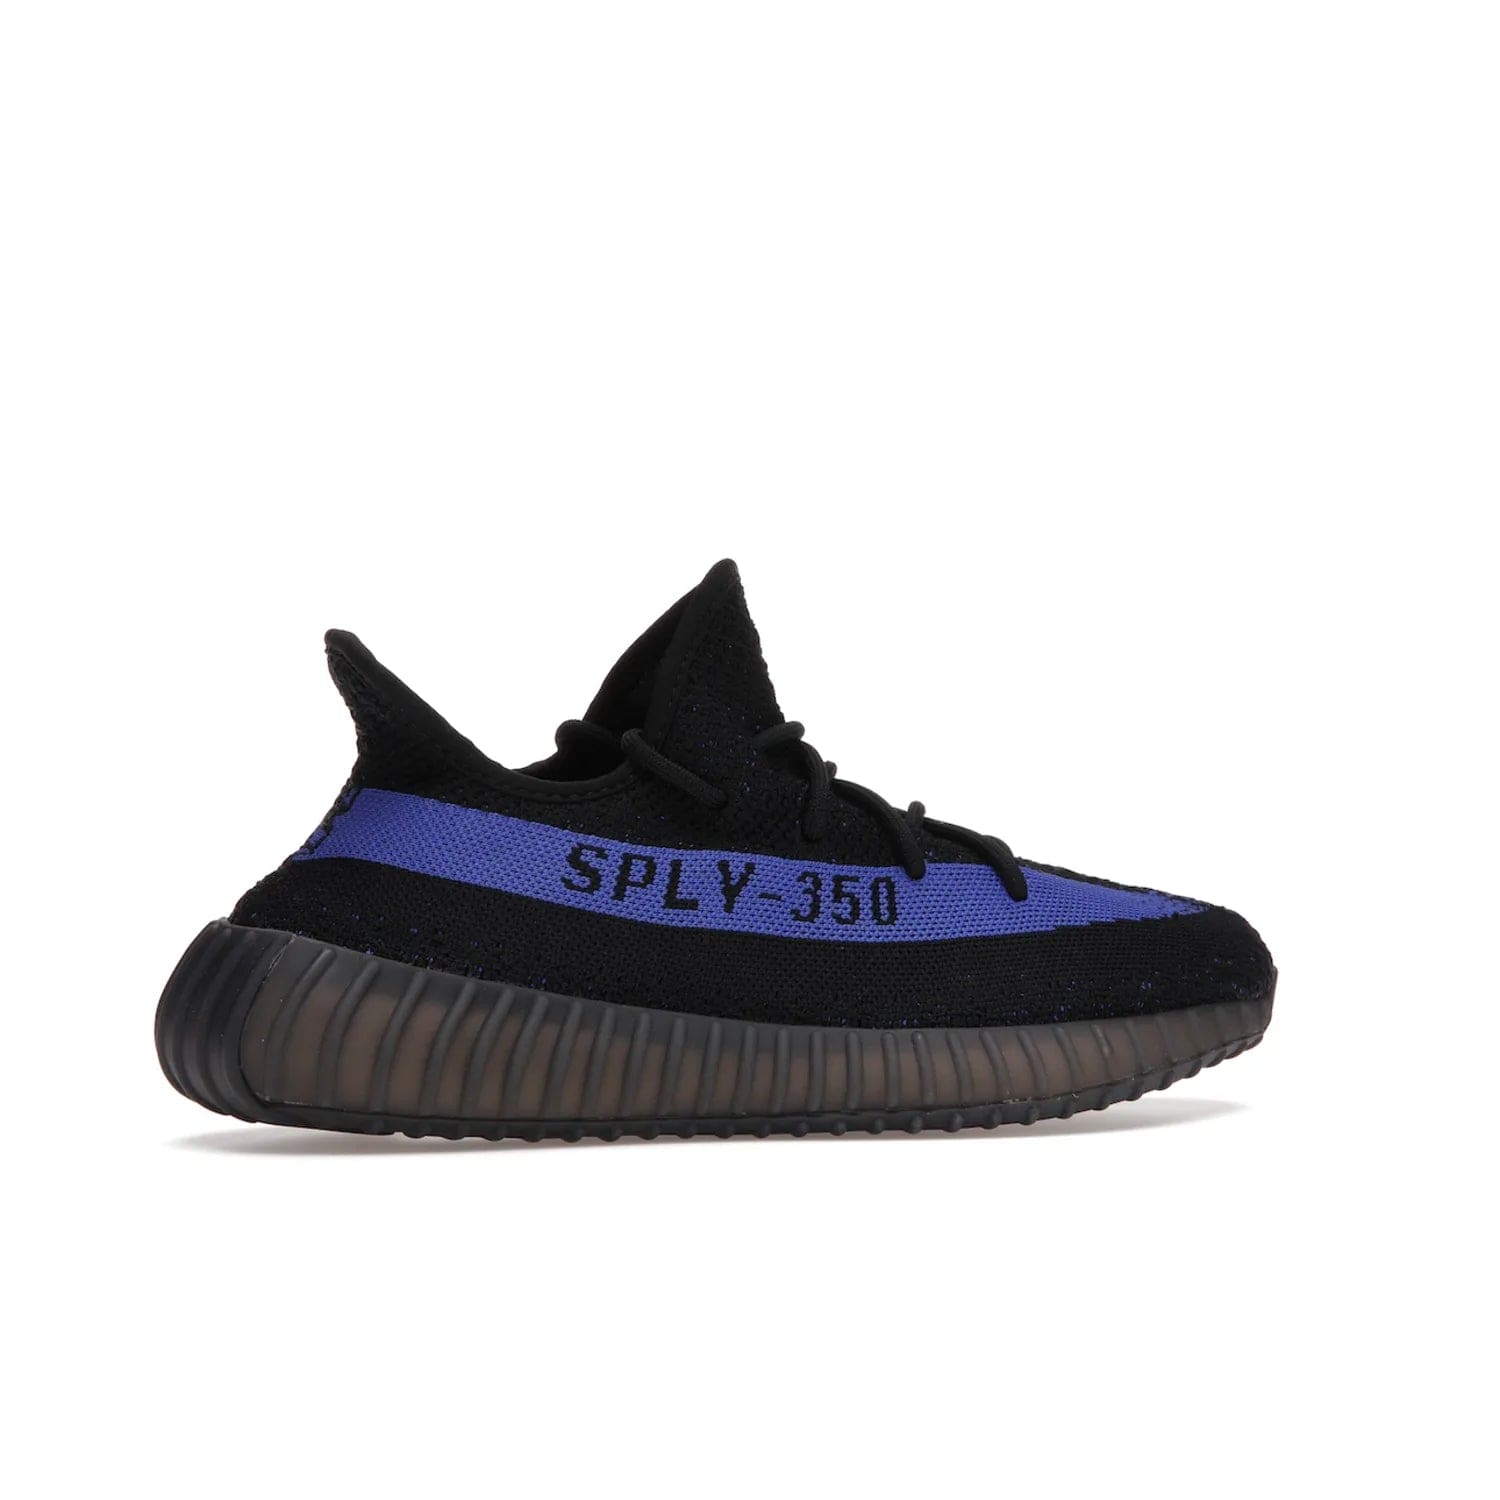 adidas Yeezy Boost 350 V2 Dazzling Blue - Image 35 - Only at www.BallersClubKickz.com - Shop the Adidas Yeezy 350 V2 Dazzling Blue, featuring a solid black Primeknit upper, Dazzling Blue side stripe, “SPLY-350” text, and a muted Boost sole. Releasing Feb 2022, this style is perfect for any shoe fan.